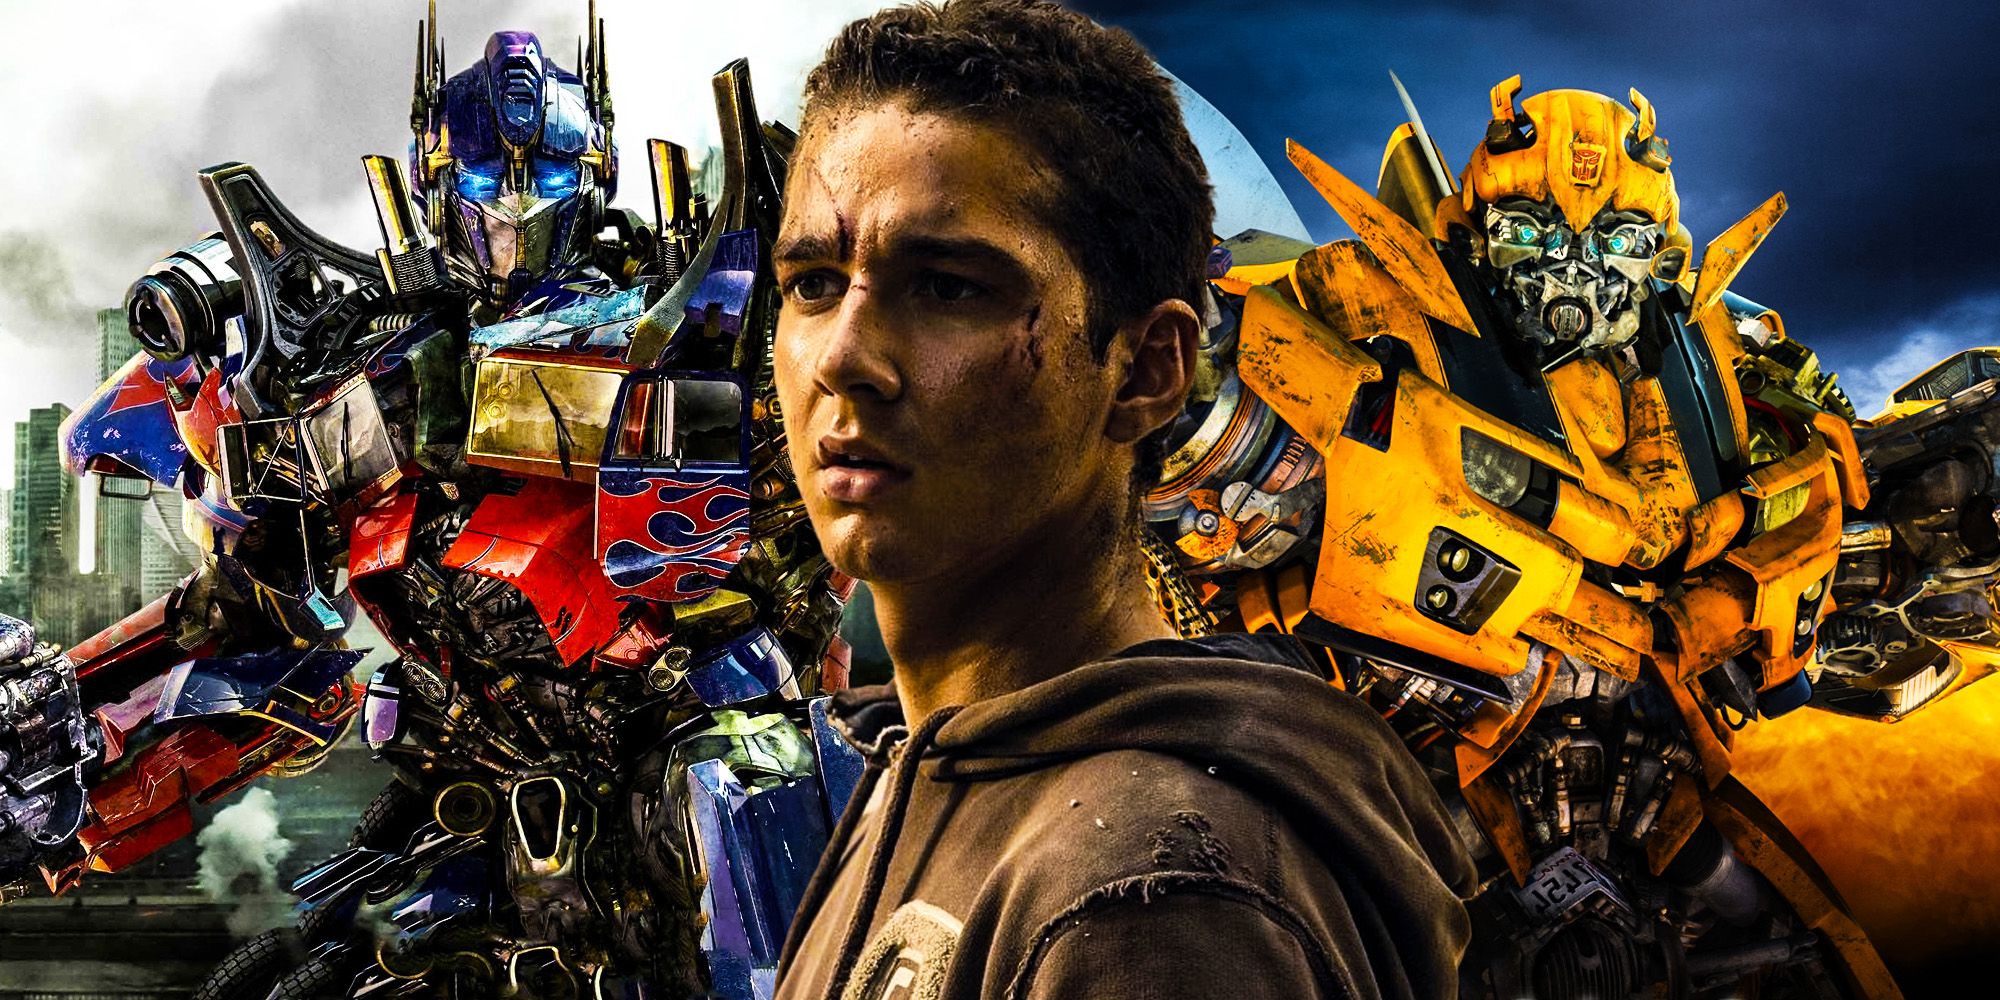 why michael bay's transformers movies were so popular despite being bad